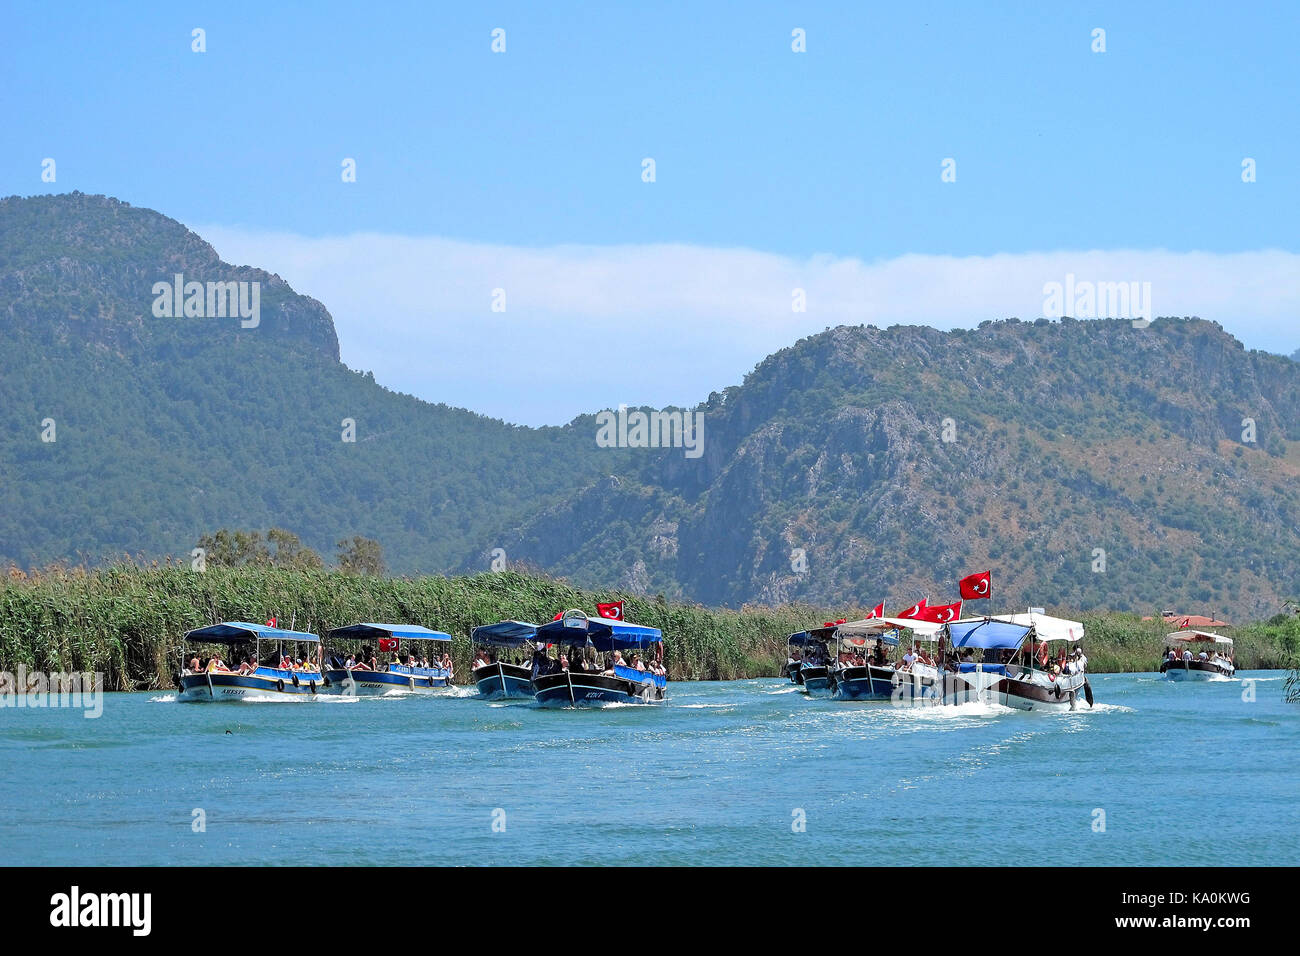 Excursion boats taking holidaymakers along the riverbank town of Dalyan, Turkey Stock Photo